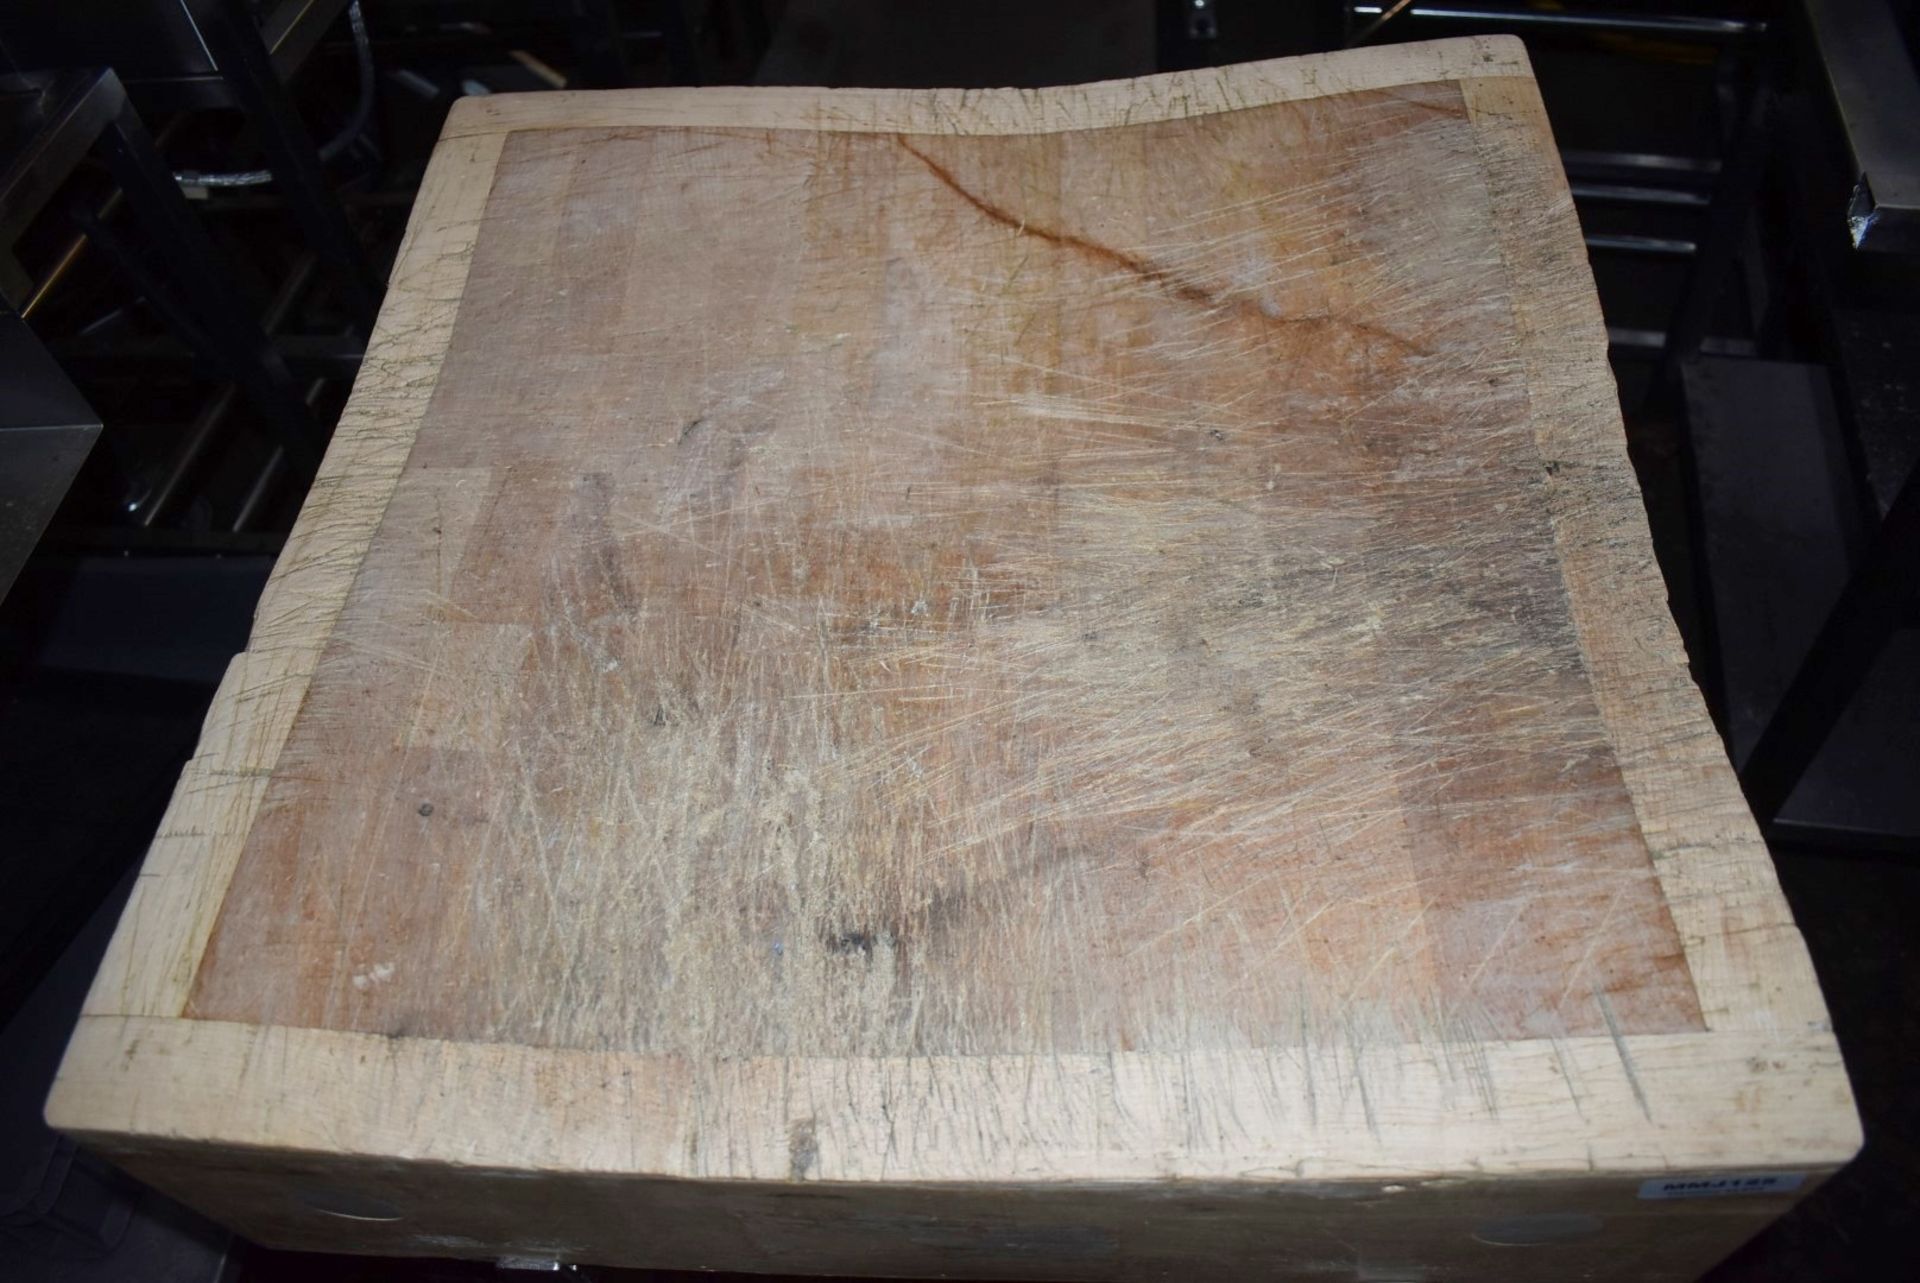 1 x Wooden Butchers Block on Stainless Steel Stand - Recently Removed From a Major Supermarket - Image 5 of 8